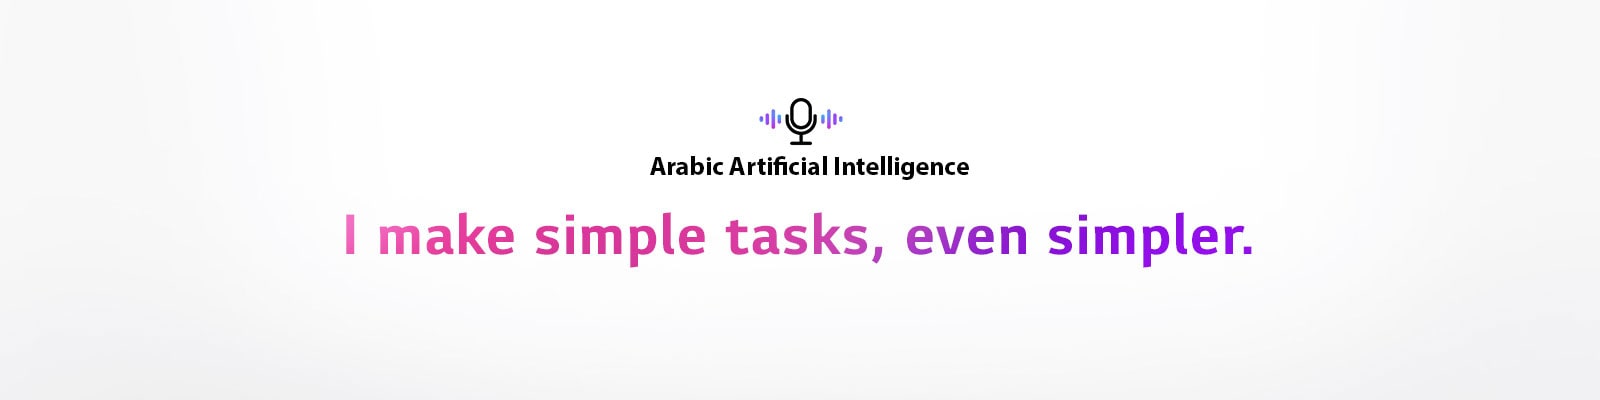 A voice command icon and a sentence saying ‘Arabic Artificial Intelligence’. There is a sentence saying ‘I make simple tasks, even simpler.’